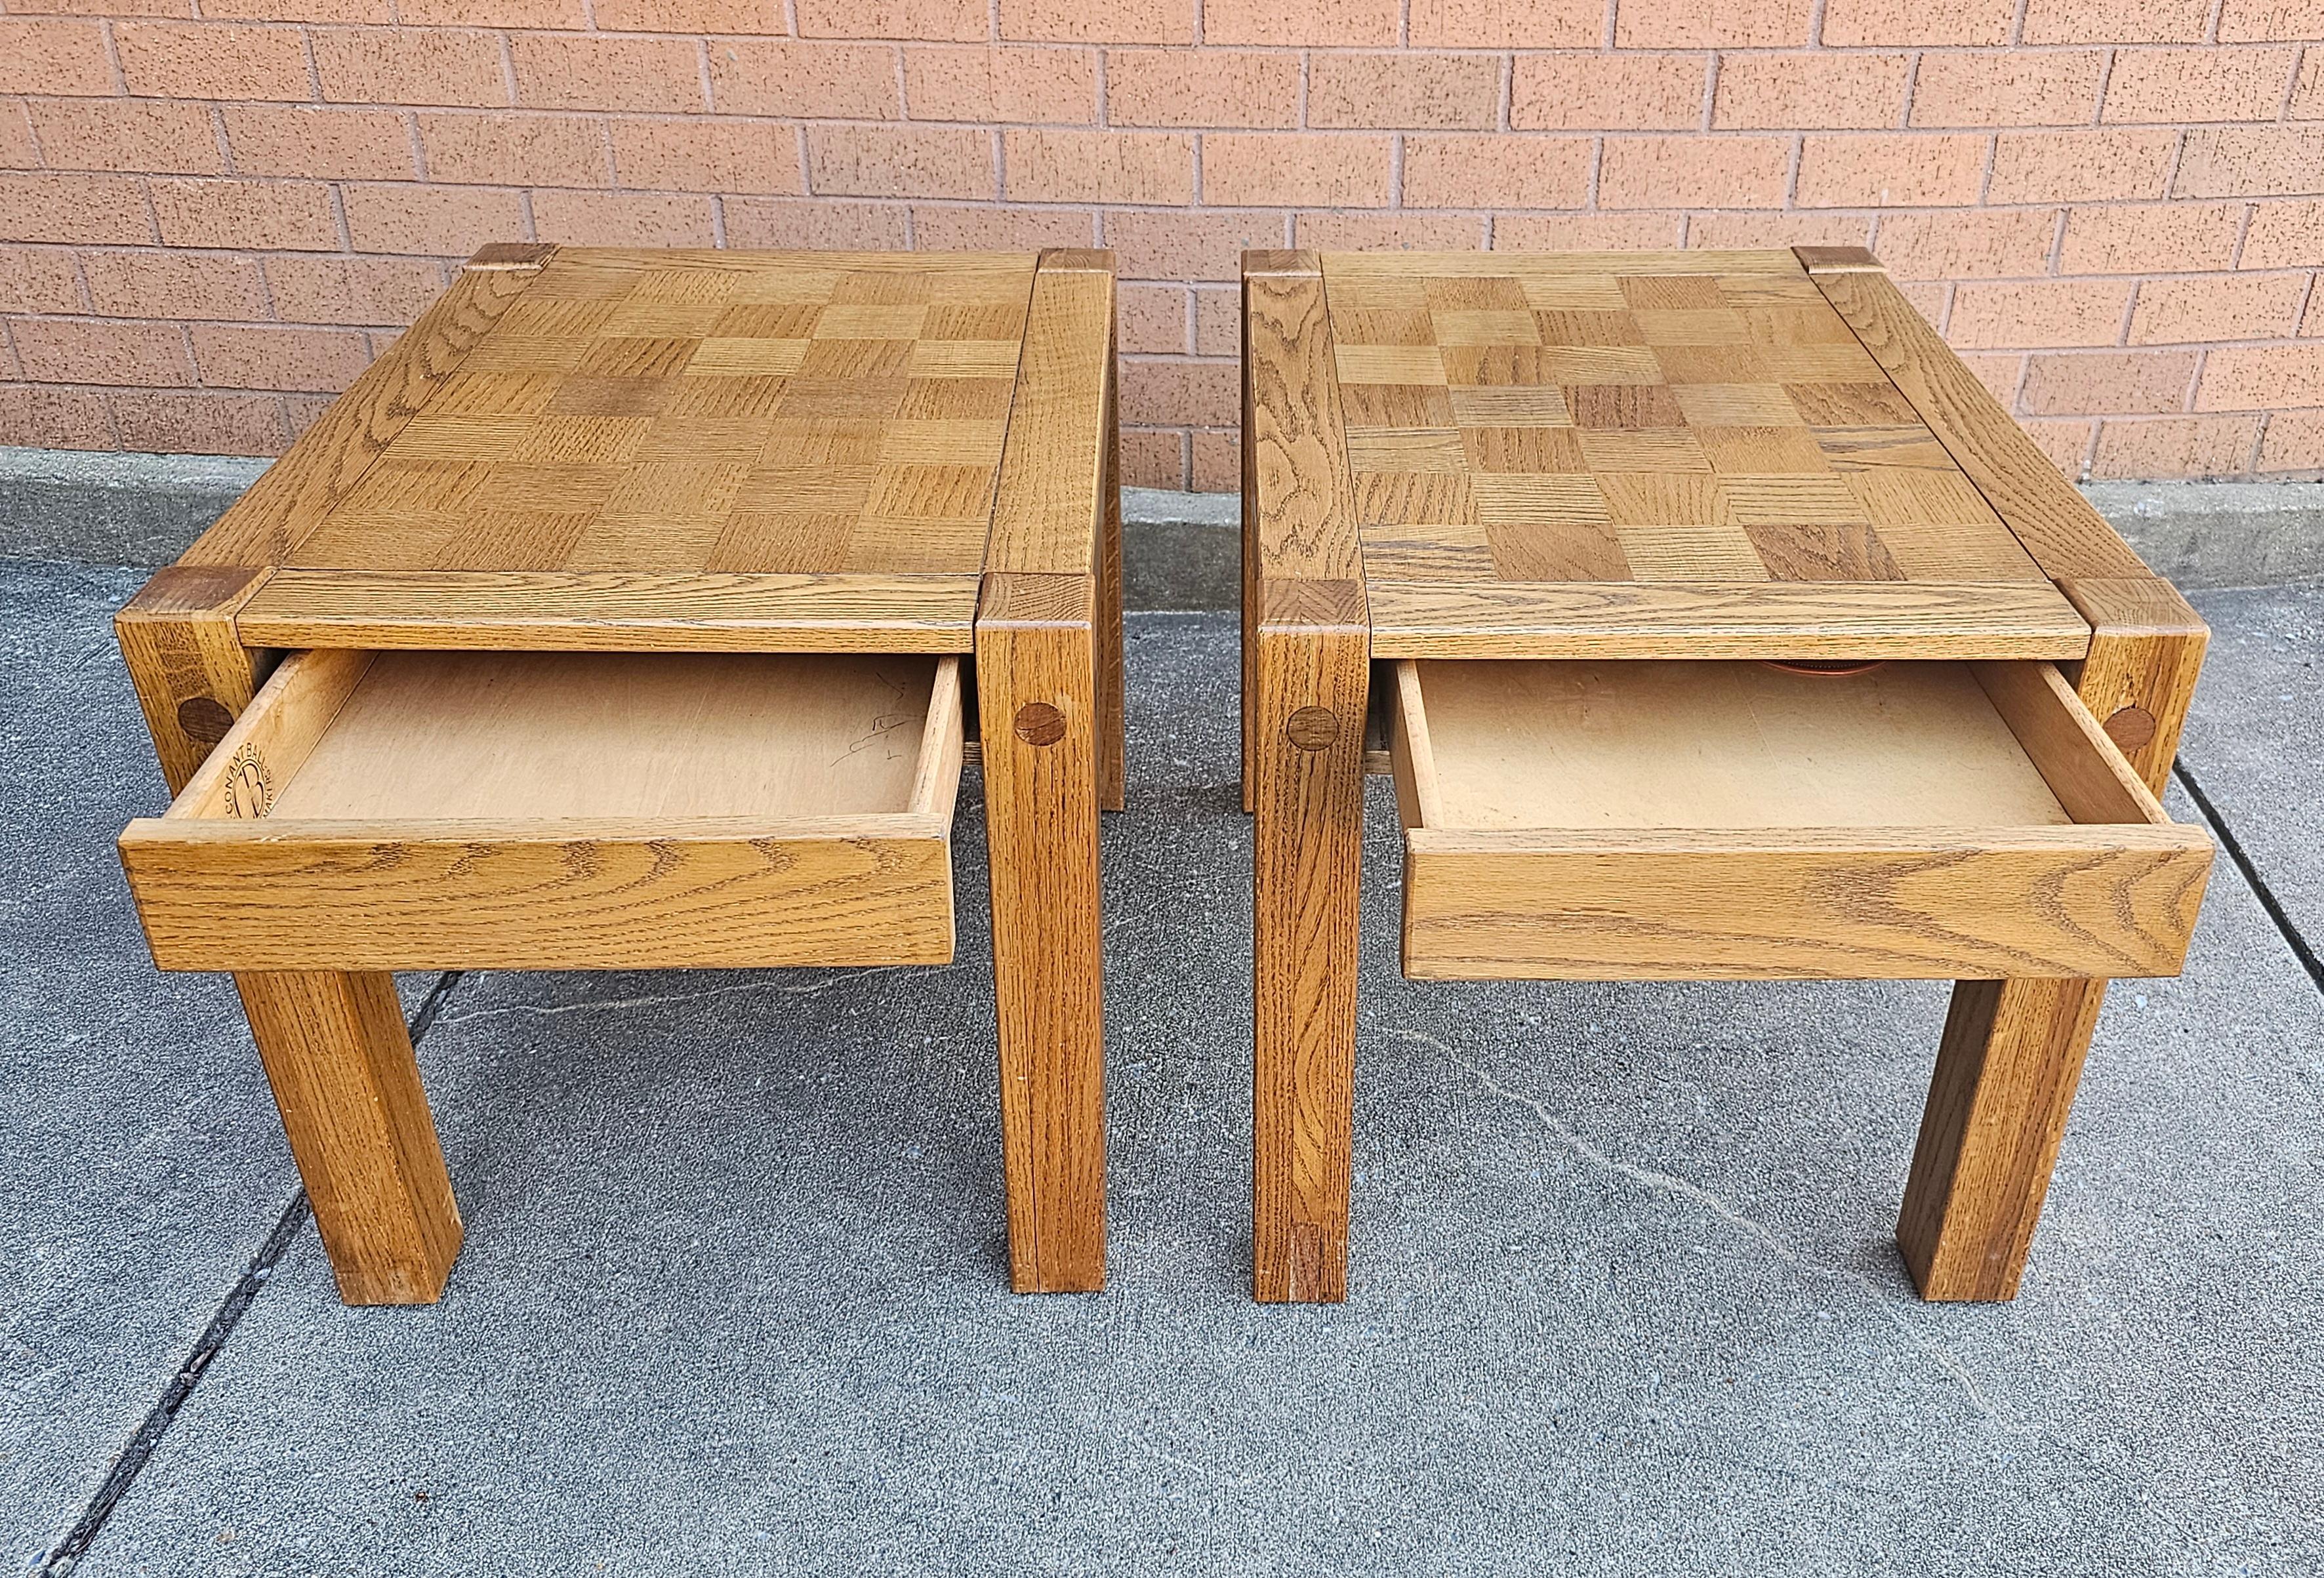 Conant Ball Mid-Century Oak Parquet Checquered Side Tables, Pair In Good Condition For Sale In Germantown, MD